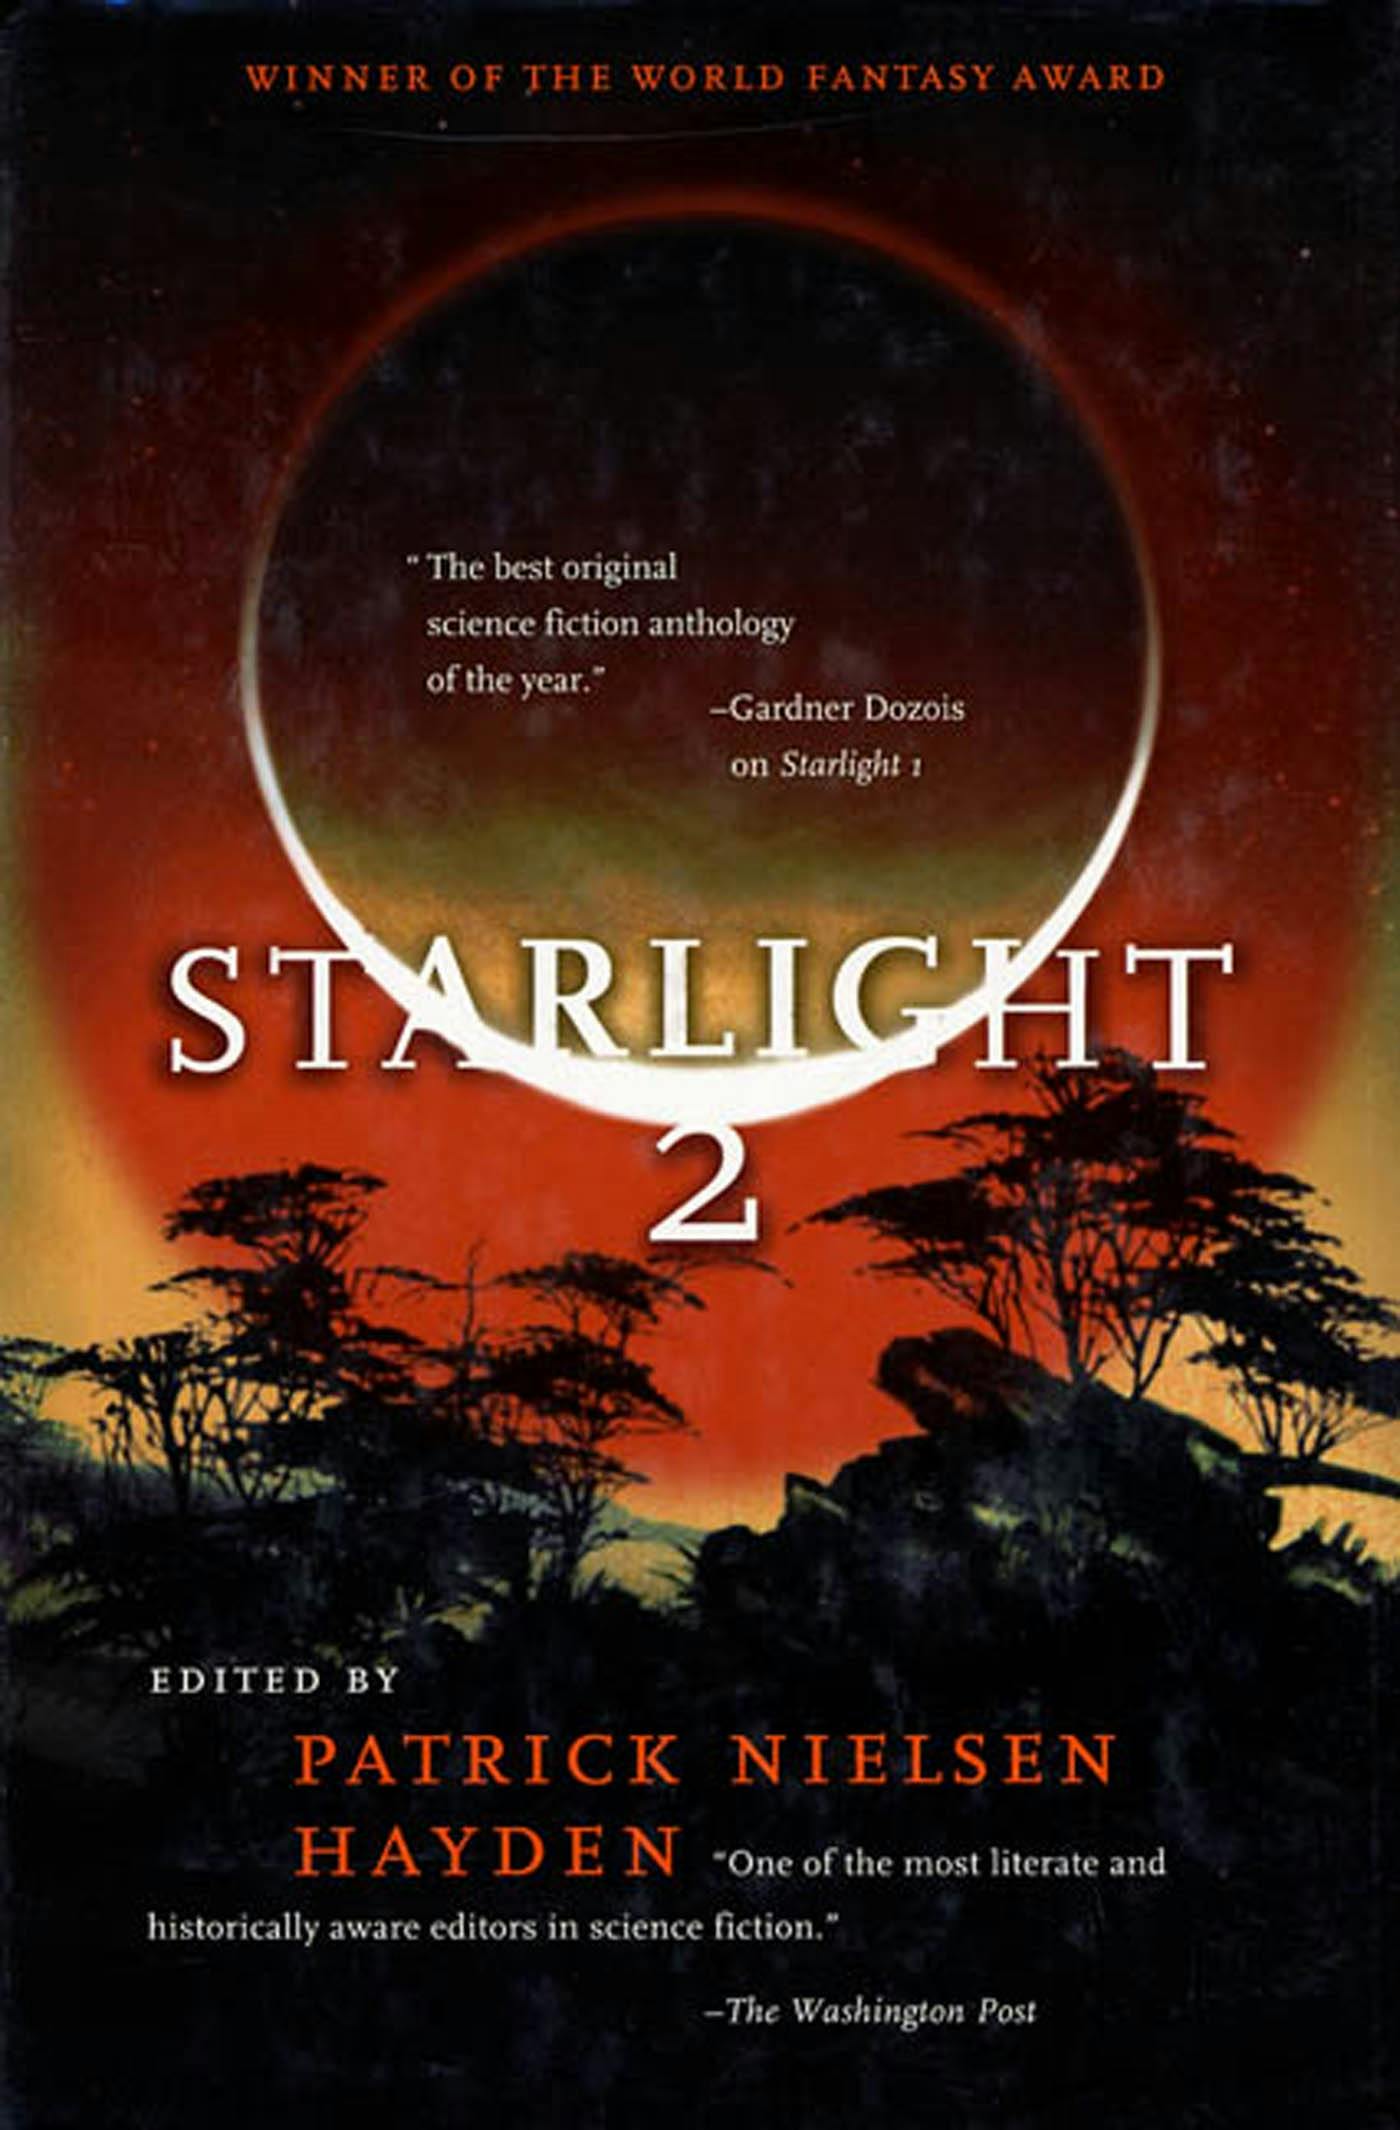 Cover for the book titled as: Starlight 2